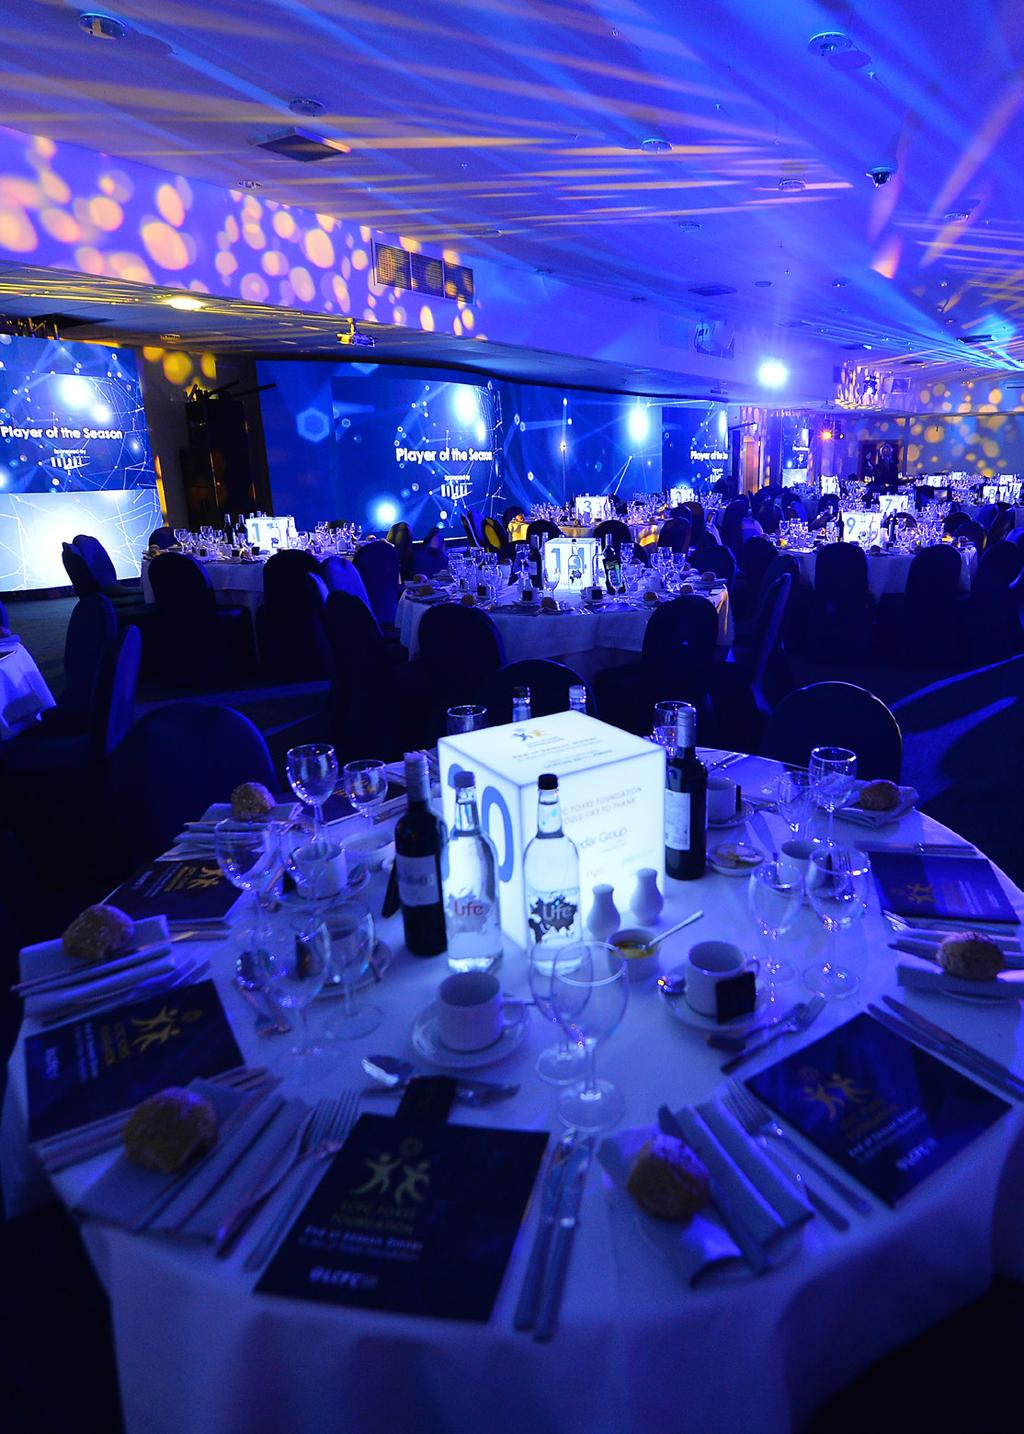 OTHER EVENTS King Power Stadium is more than just a football stadium. All year round, its first class facilities are available to accommodate a host of purposes.